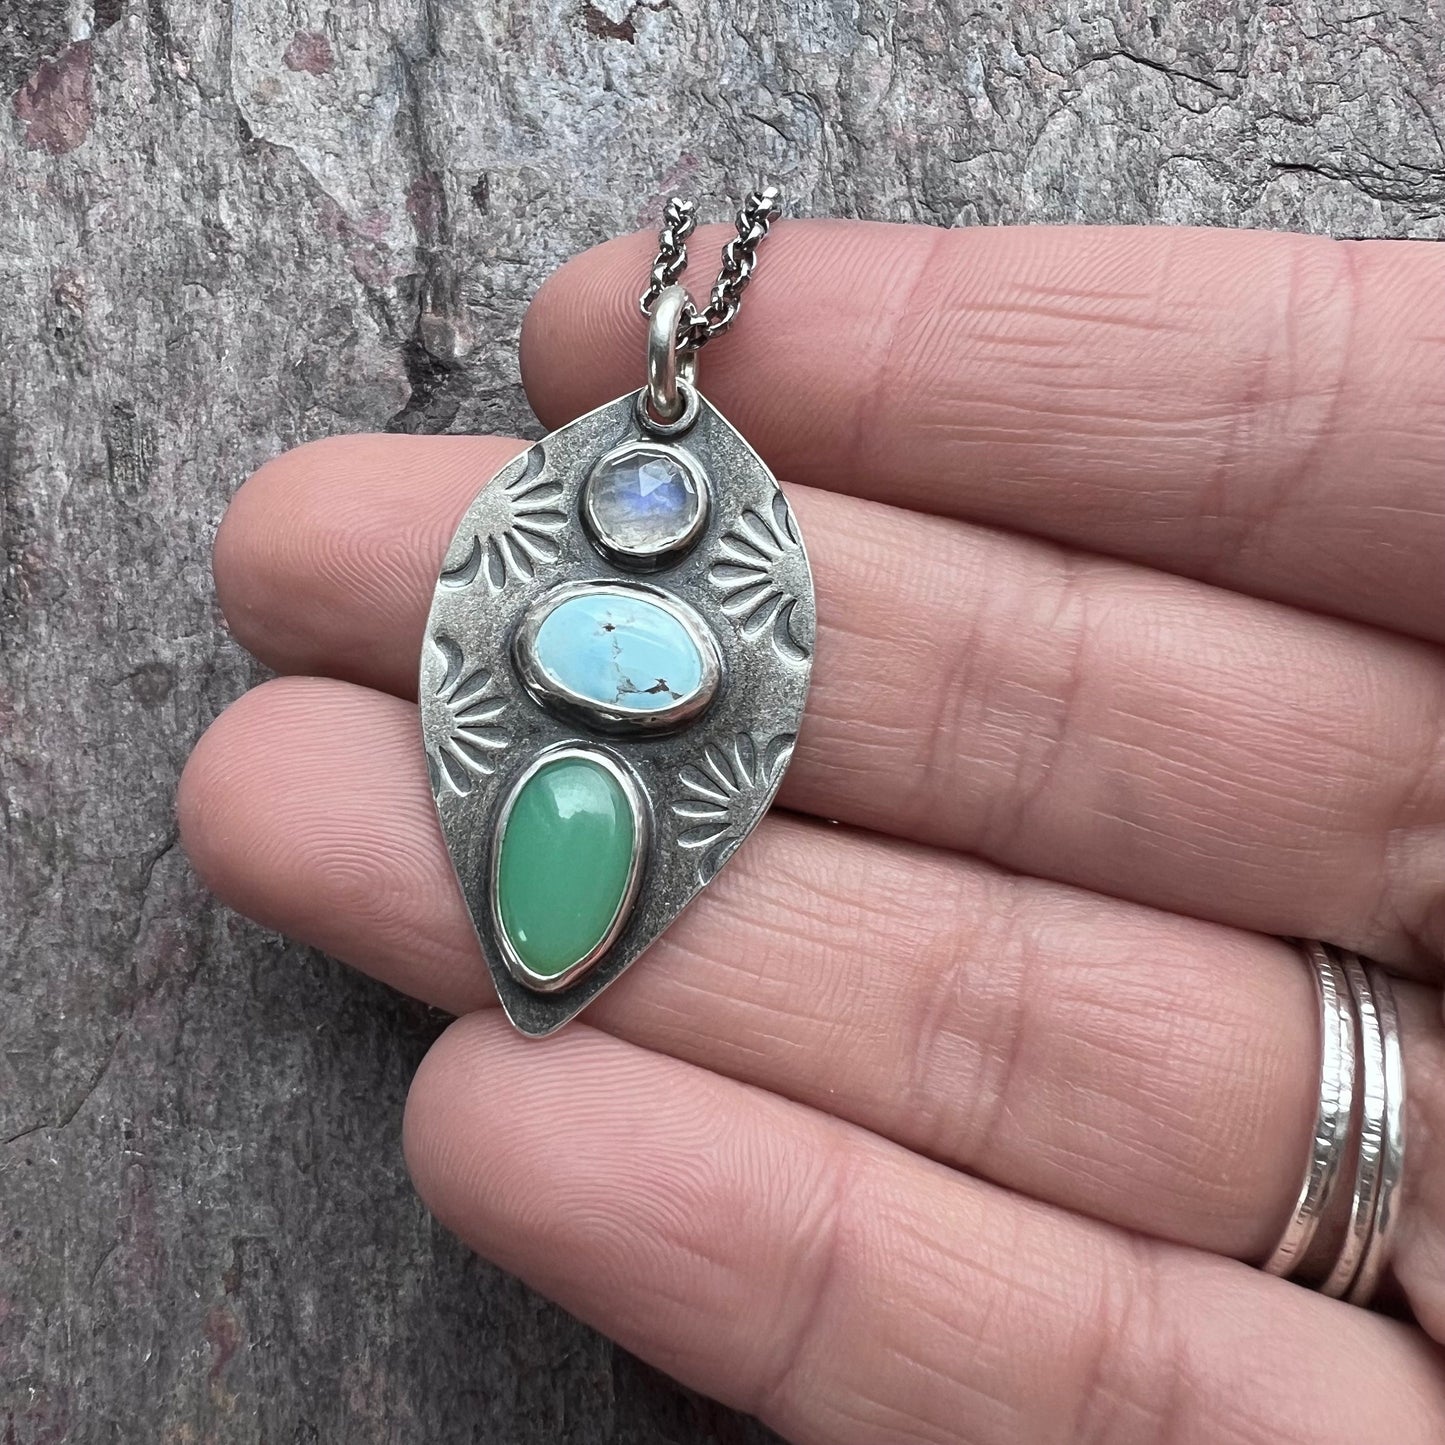 Sterling Silver Rainbow Moonstone, Turquoise, and Chrysoprase Necklace - Handmade One-of-a-kind Pendant on Sterling Silver Chain